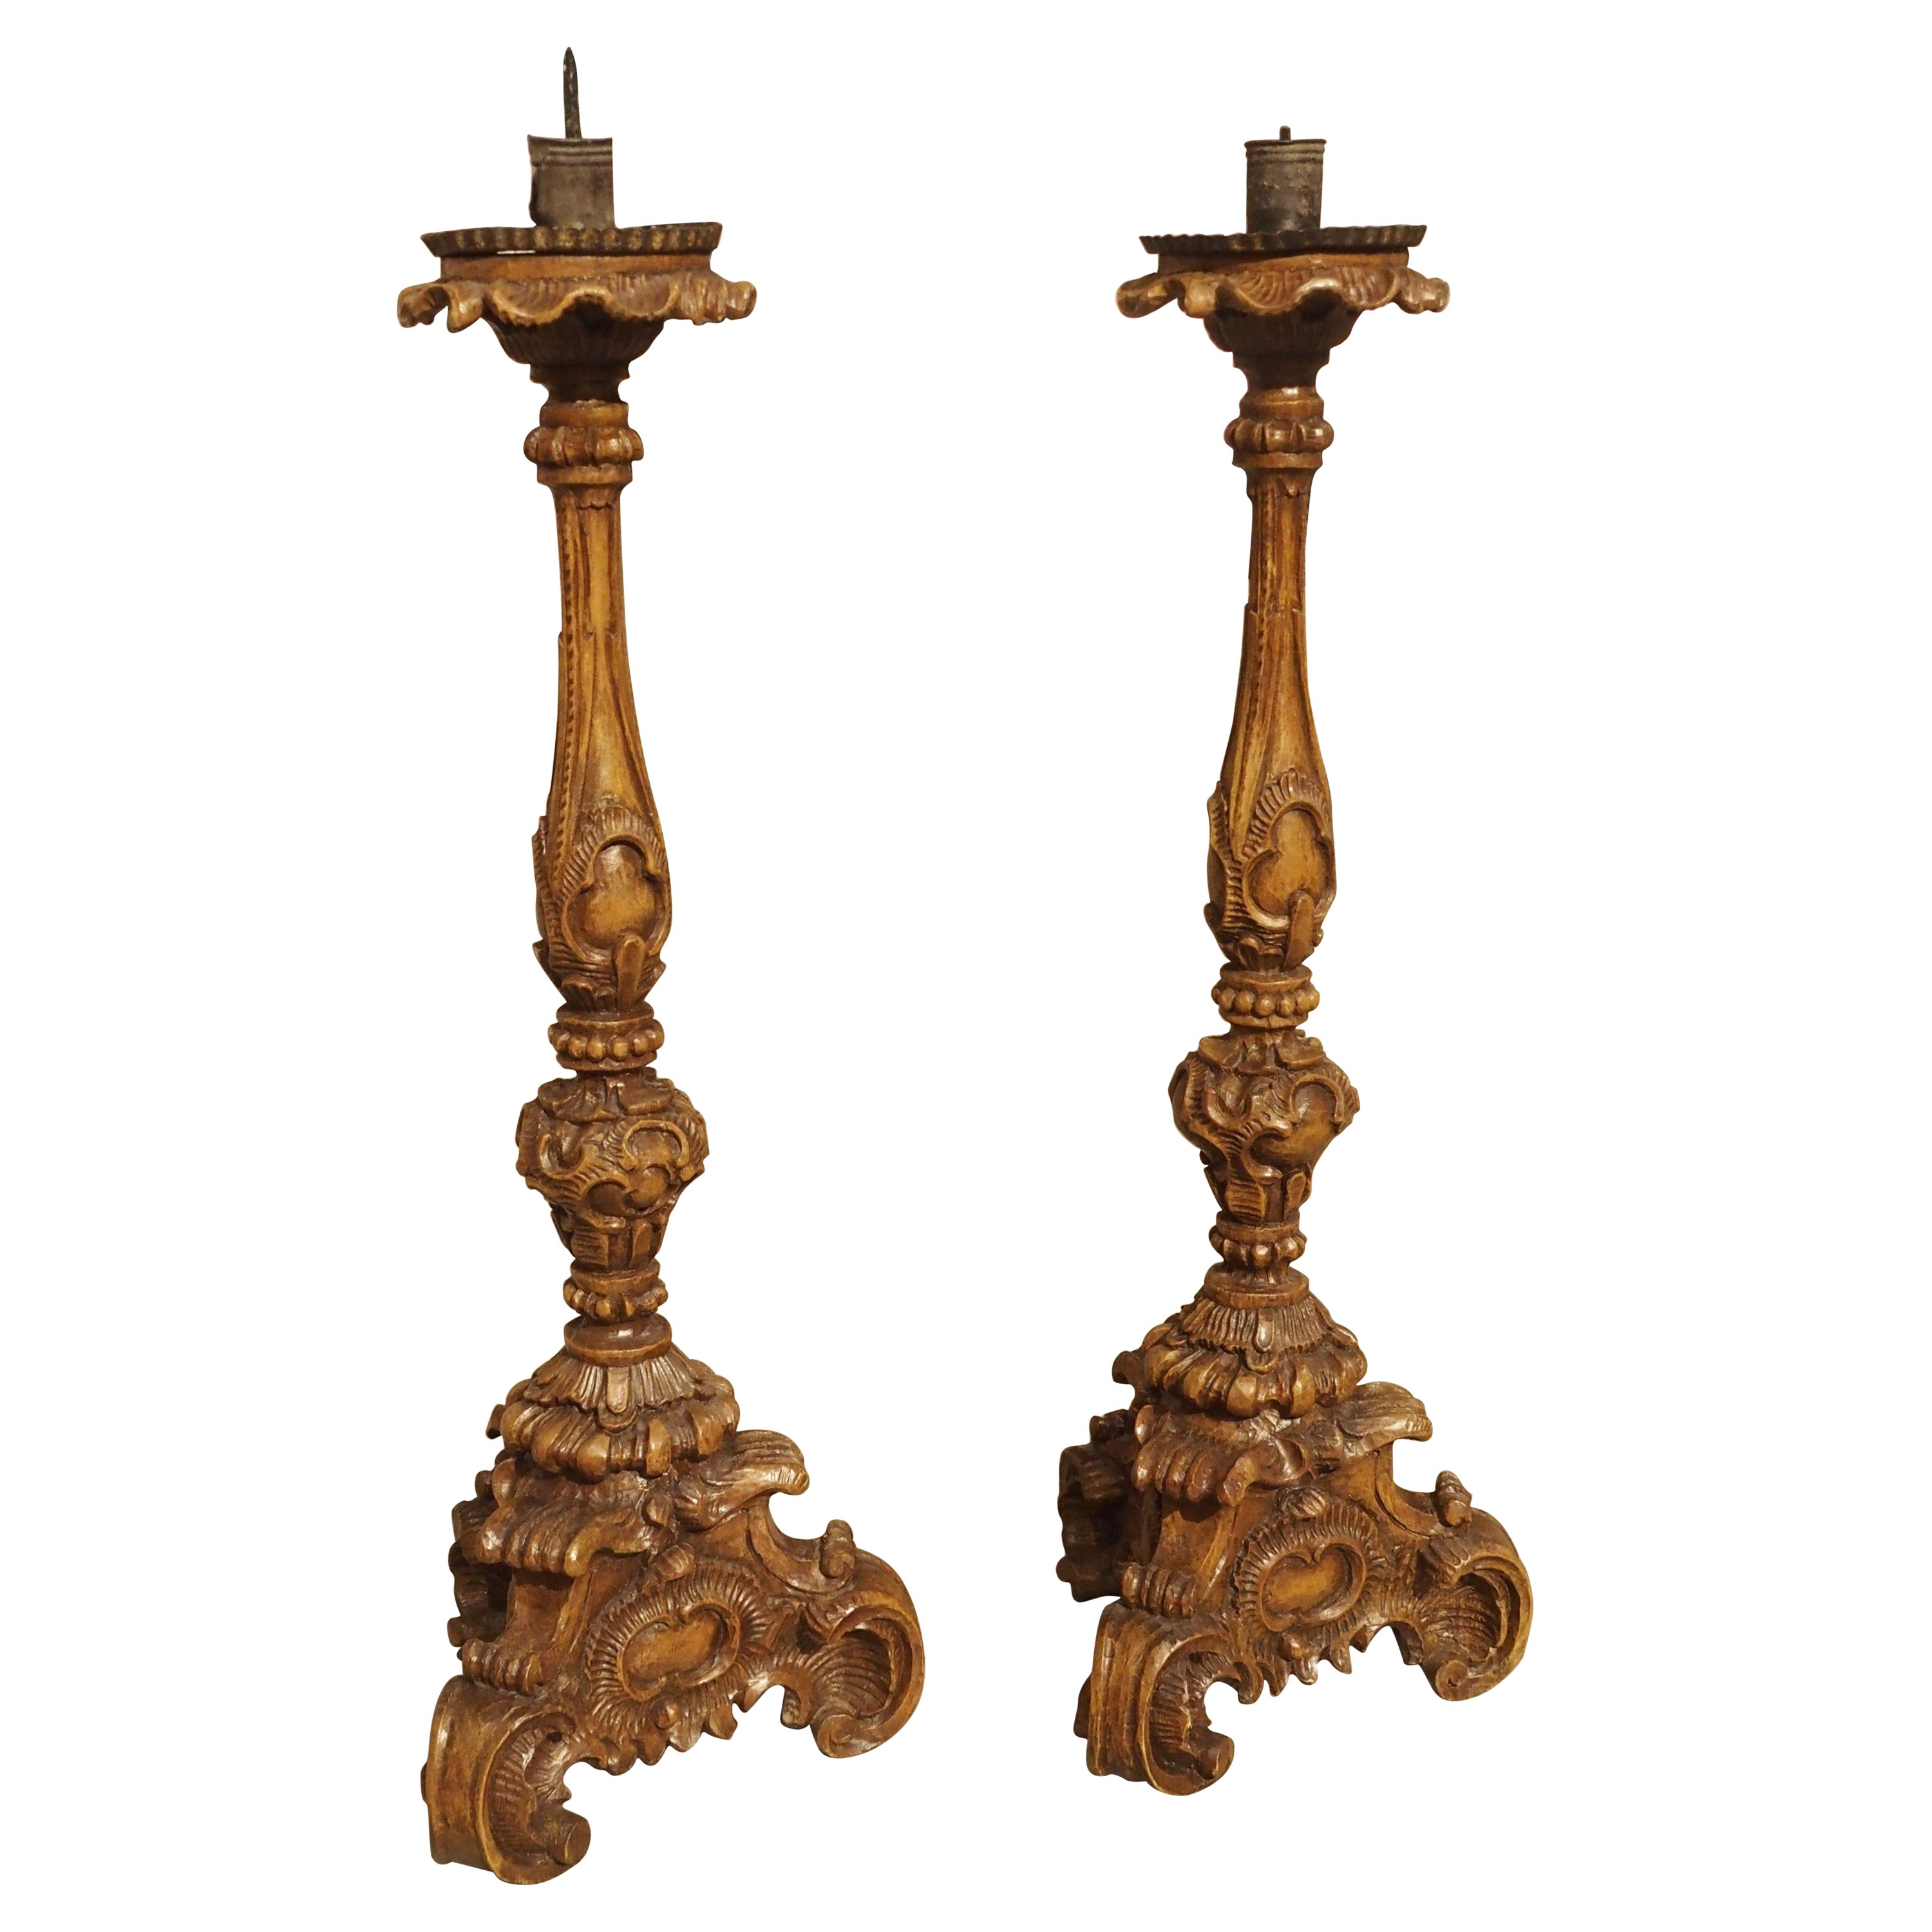 Superb Pair of Finely Carved 18th Century French Candlesticks